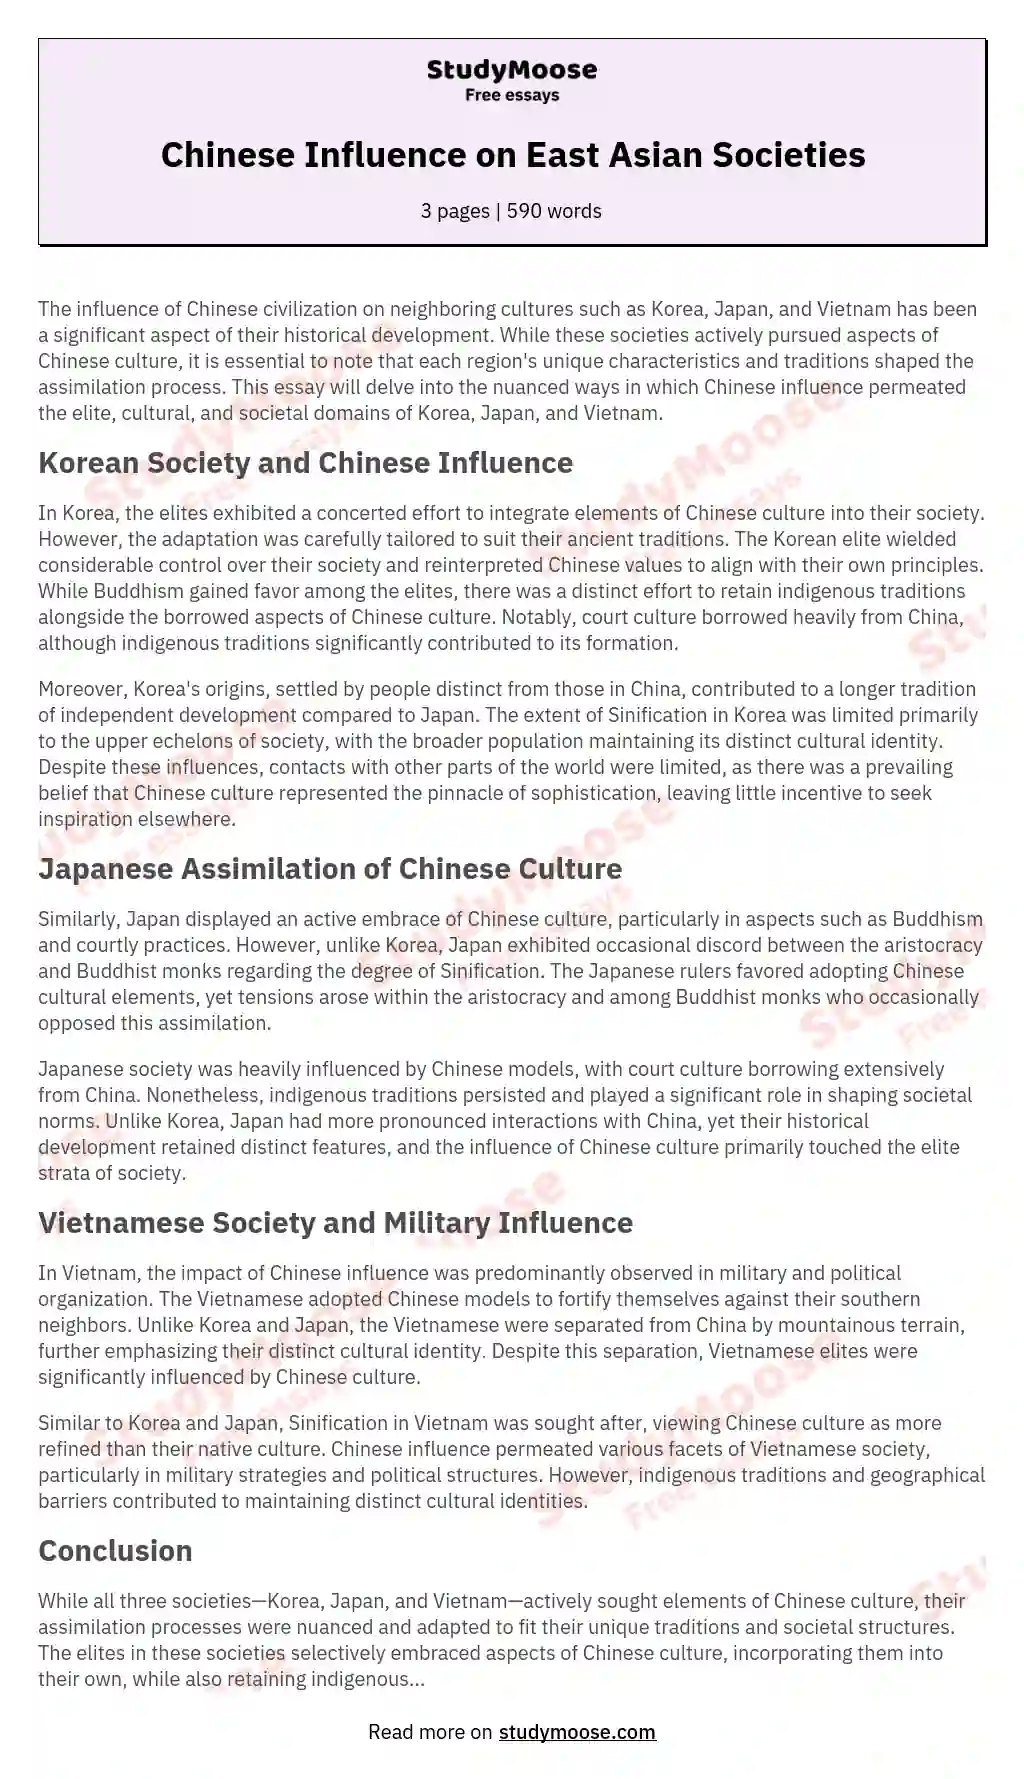 Chinese Influence on East Asian Societies essay